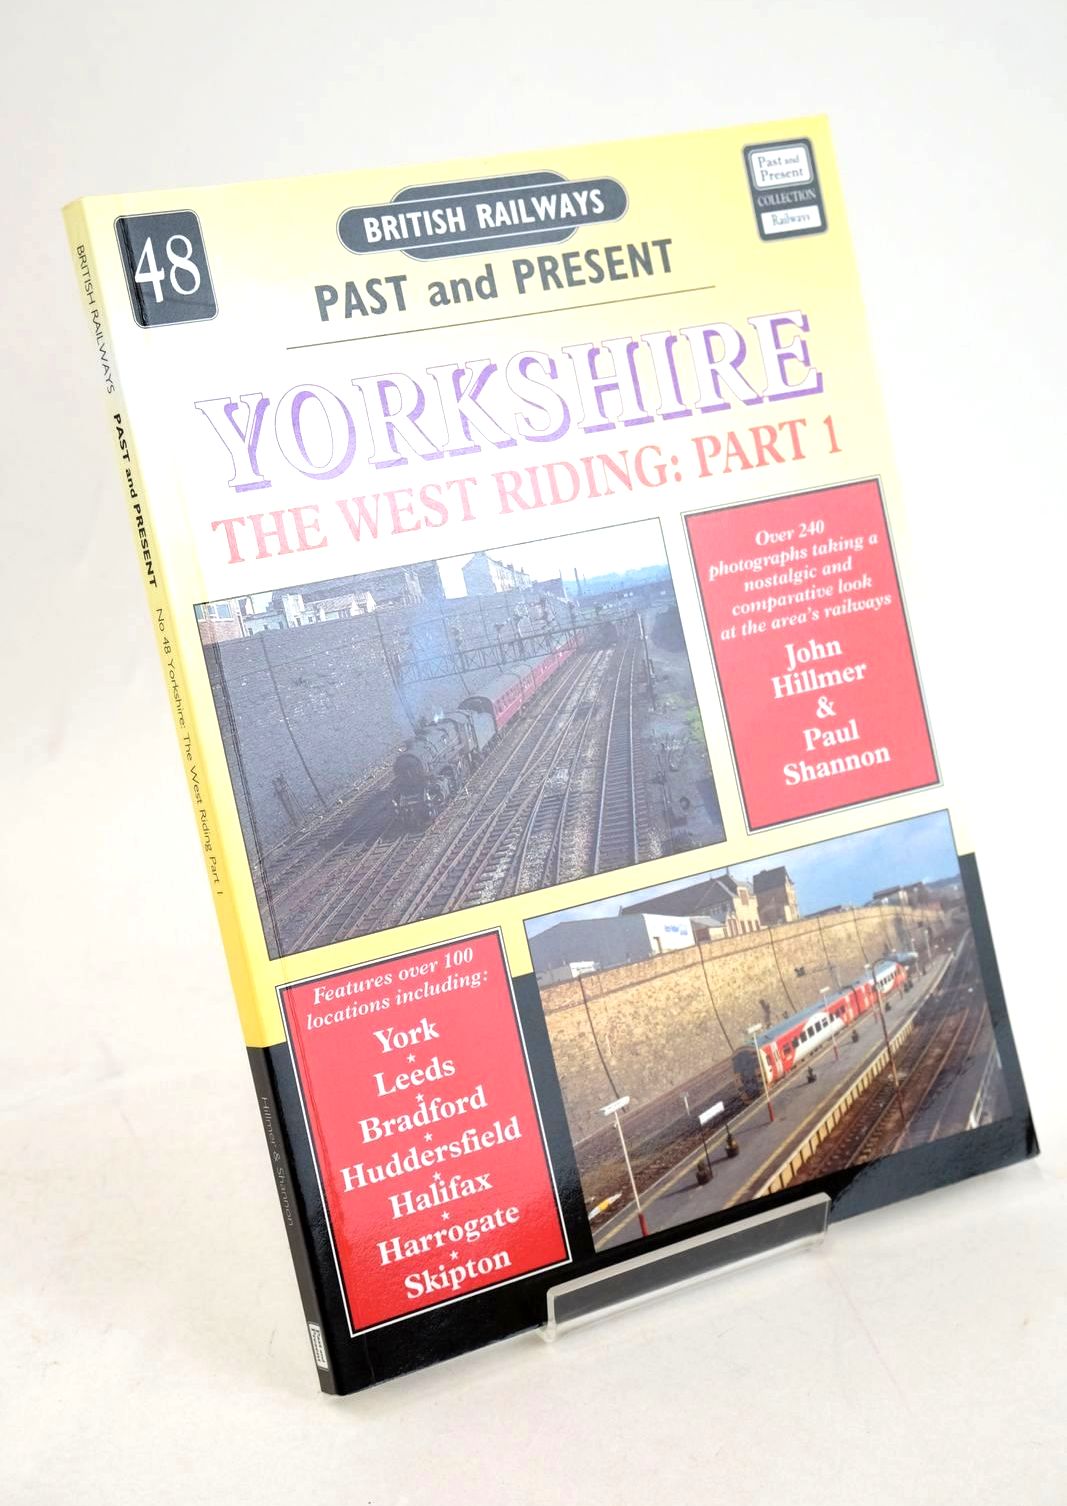 Photo of BRITISH RAILWAYS PAST AND PRESENT No. 48 YORKSHIRE AND WEST RIDING: PART 1 written by Hillmer, John Shannon, Paul published by Past and Present Publishing Ltd. (STOCK CODE: 1327541)  for sale by Stella & Rose's Books